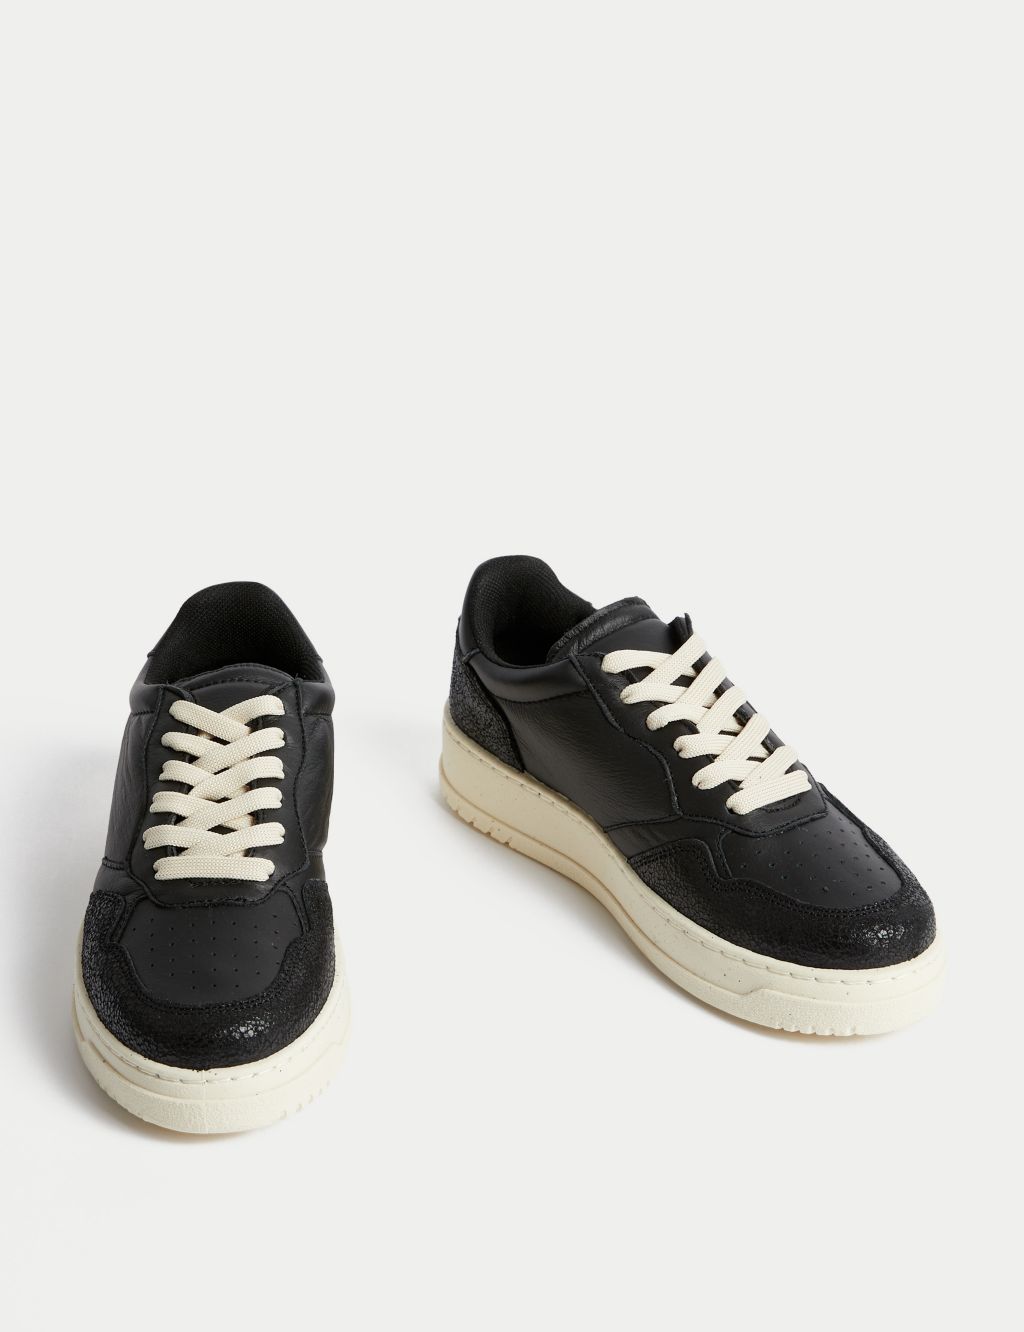 Leather Lace Up Suede Panel Trainers image 2